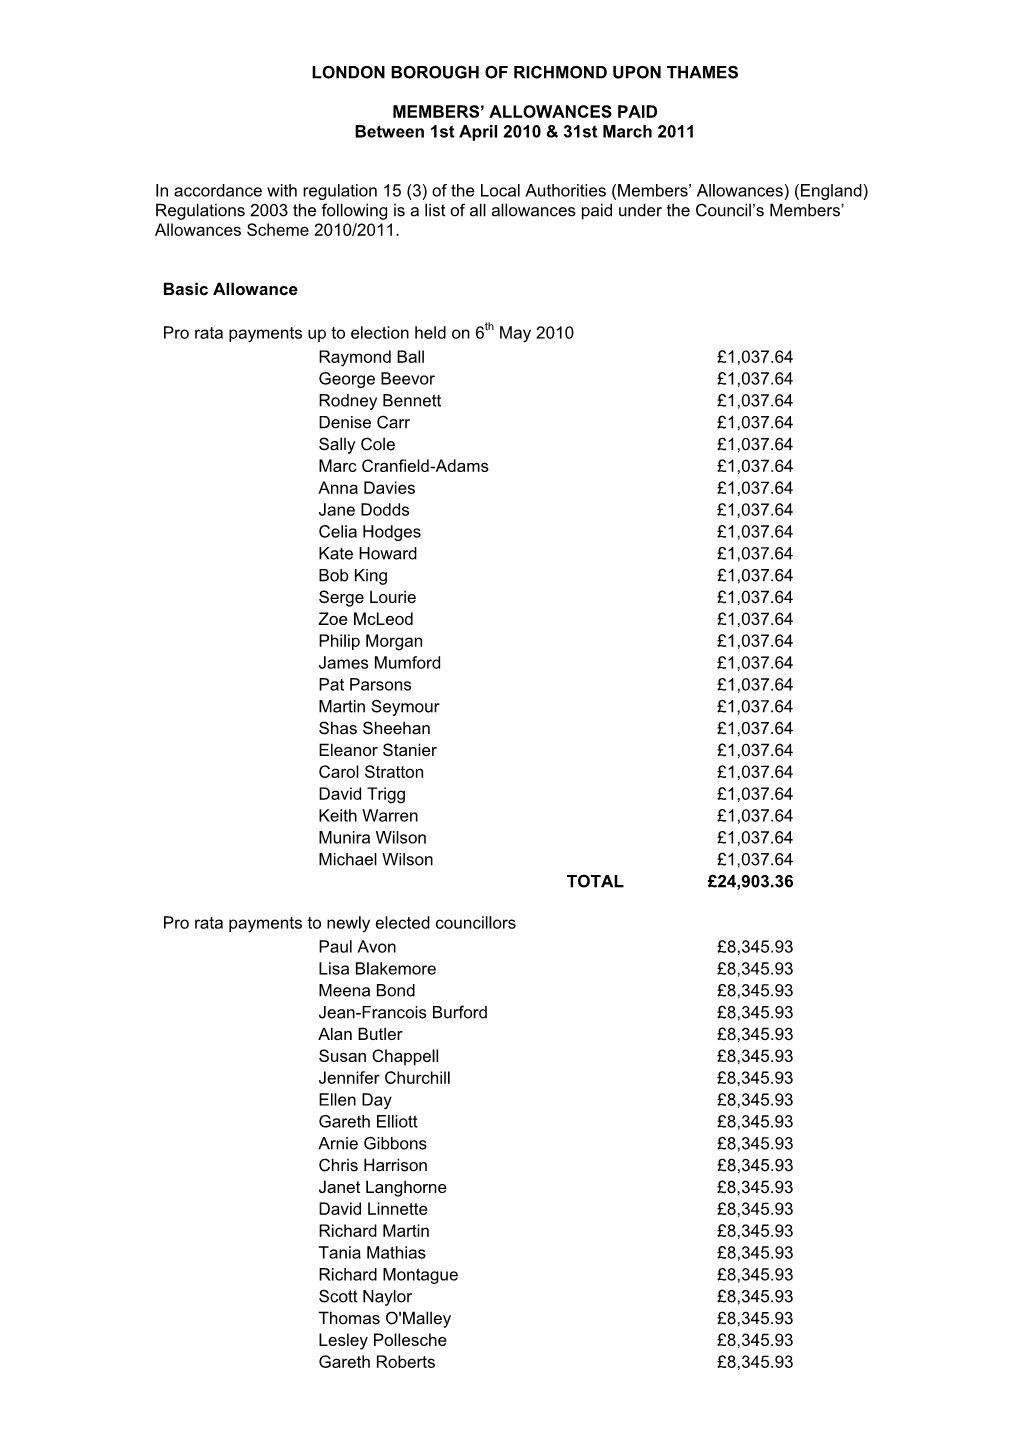 Members' Allowances Paid in 2010/11